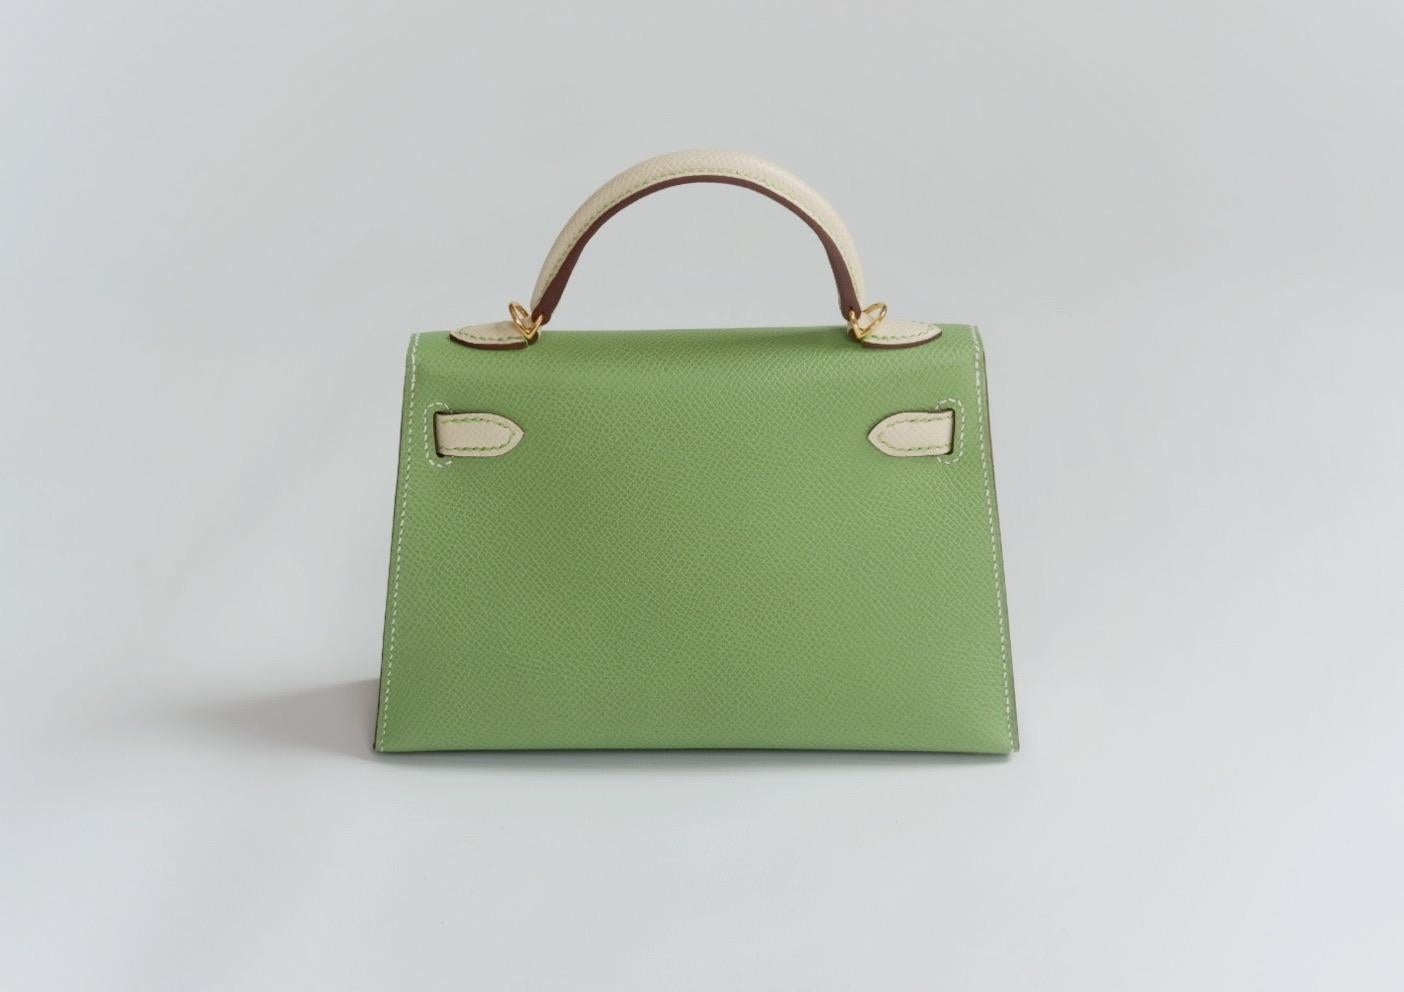 Replica Hermes Kelly Retourne 28 Handmade Bag In Jaune Ambre Clemence  Leather